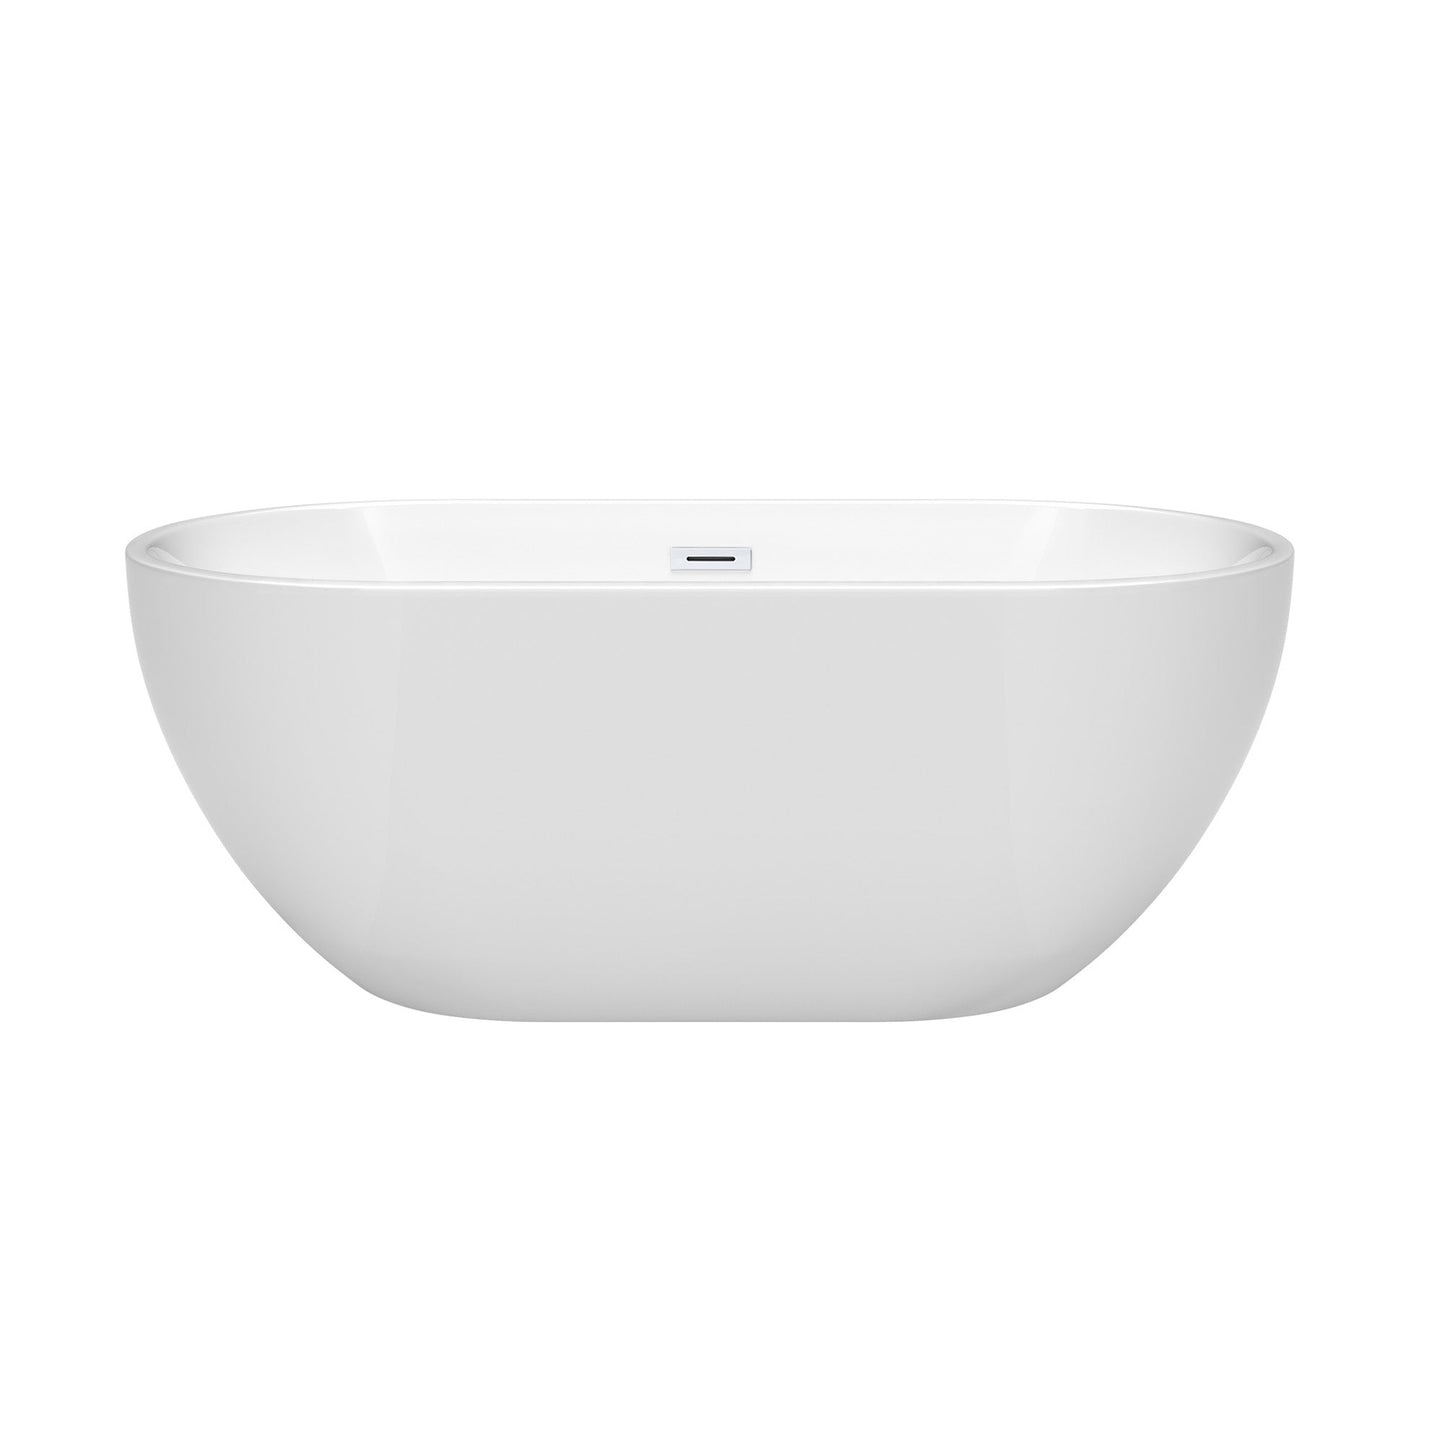 Wyndham Collection Brooklyn 60" Freestanding Bathtub in White With Shiny White Drain and Overflow Trim